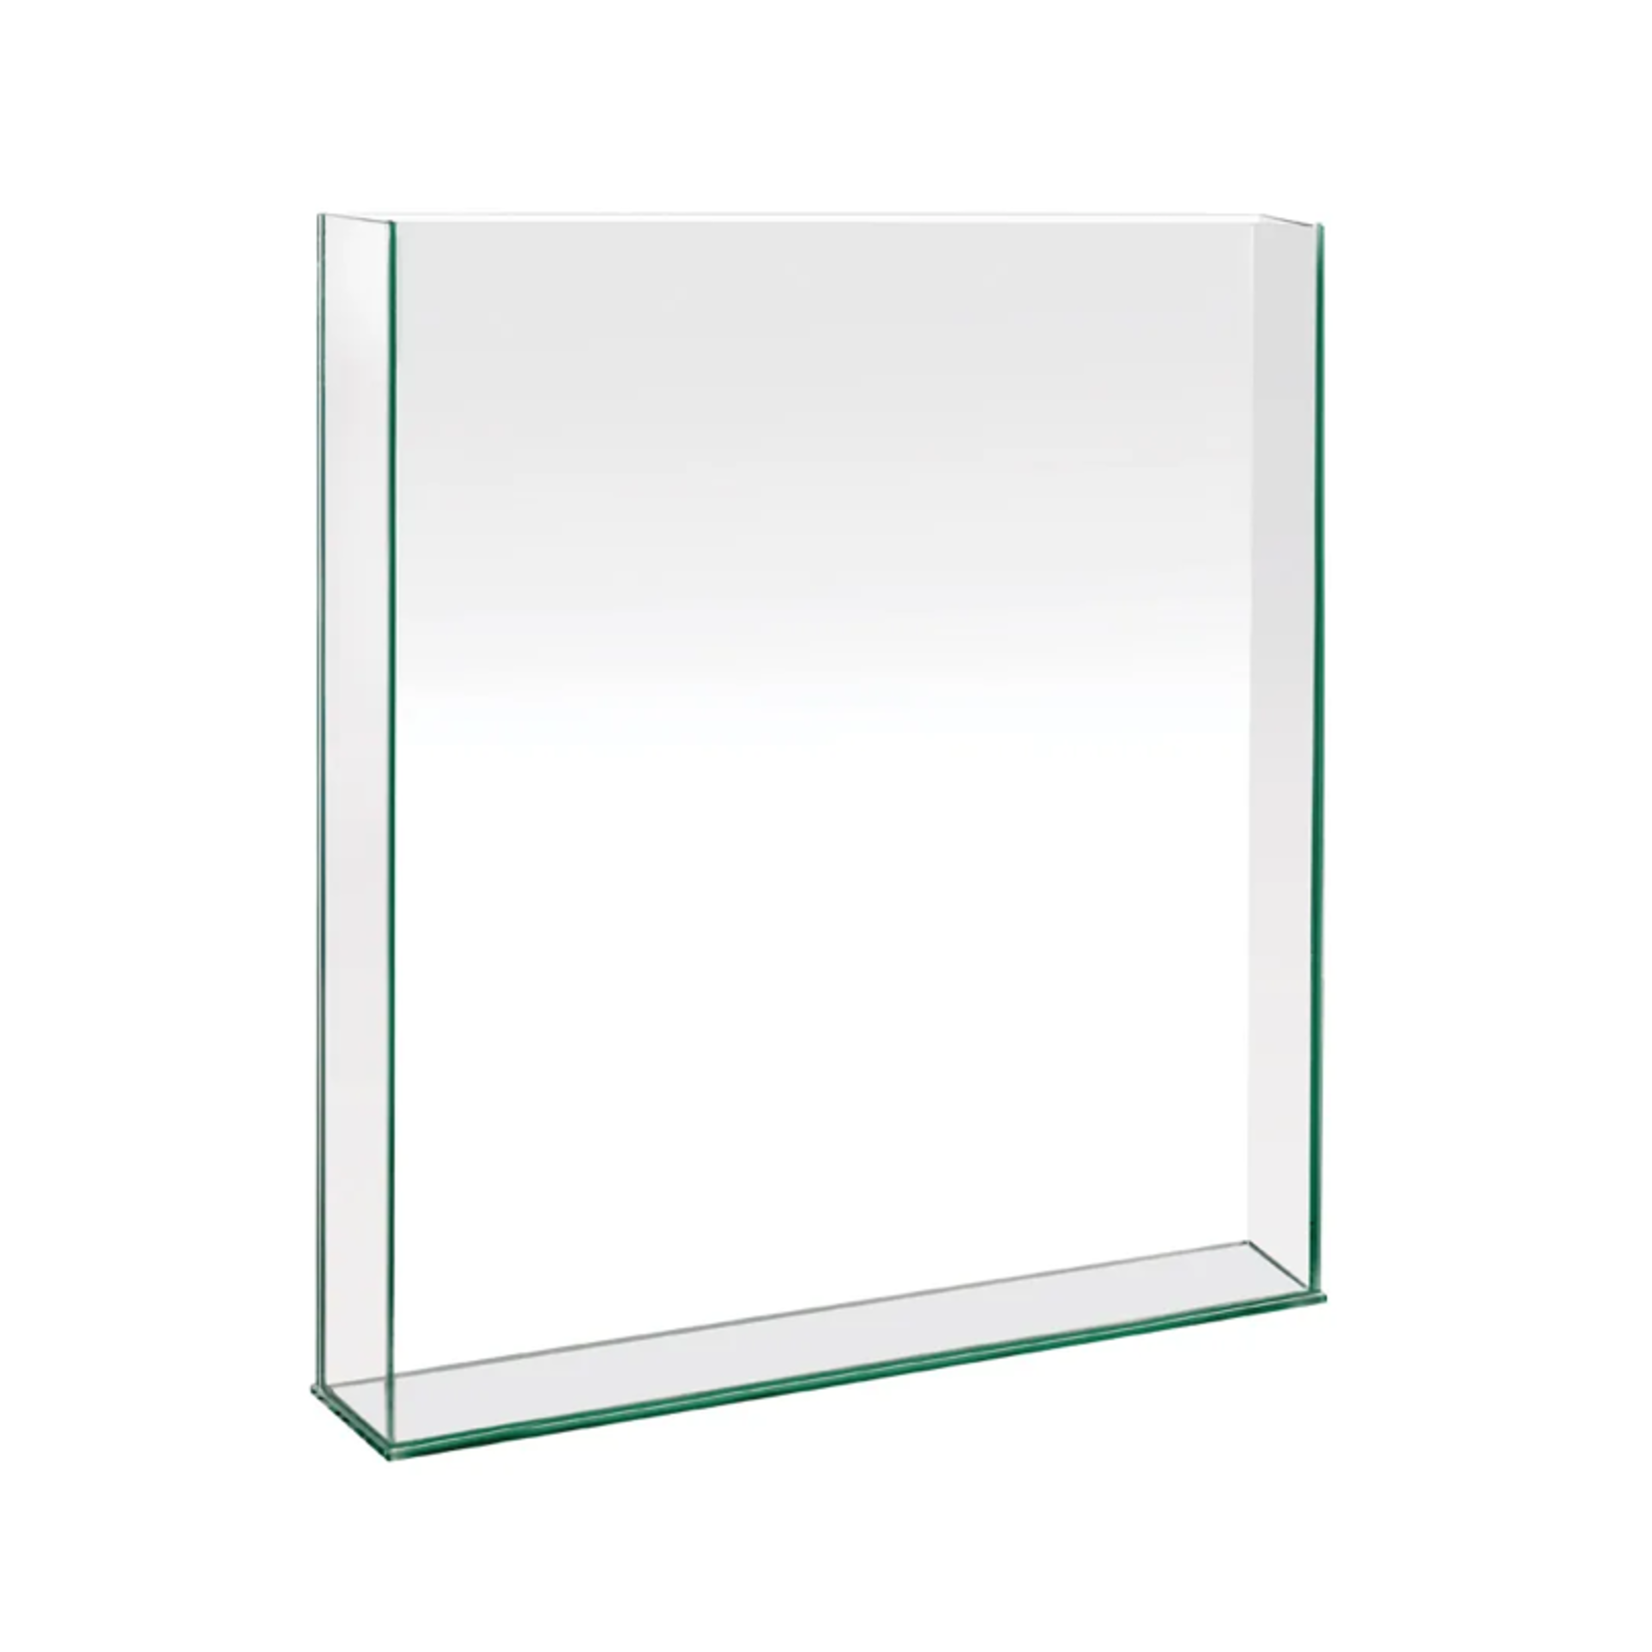 12"H X 8" X 3" RECTANGLE PLATED GLASS CLEAR